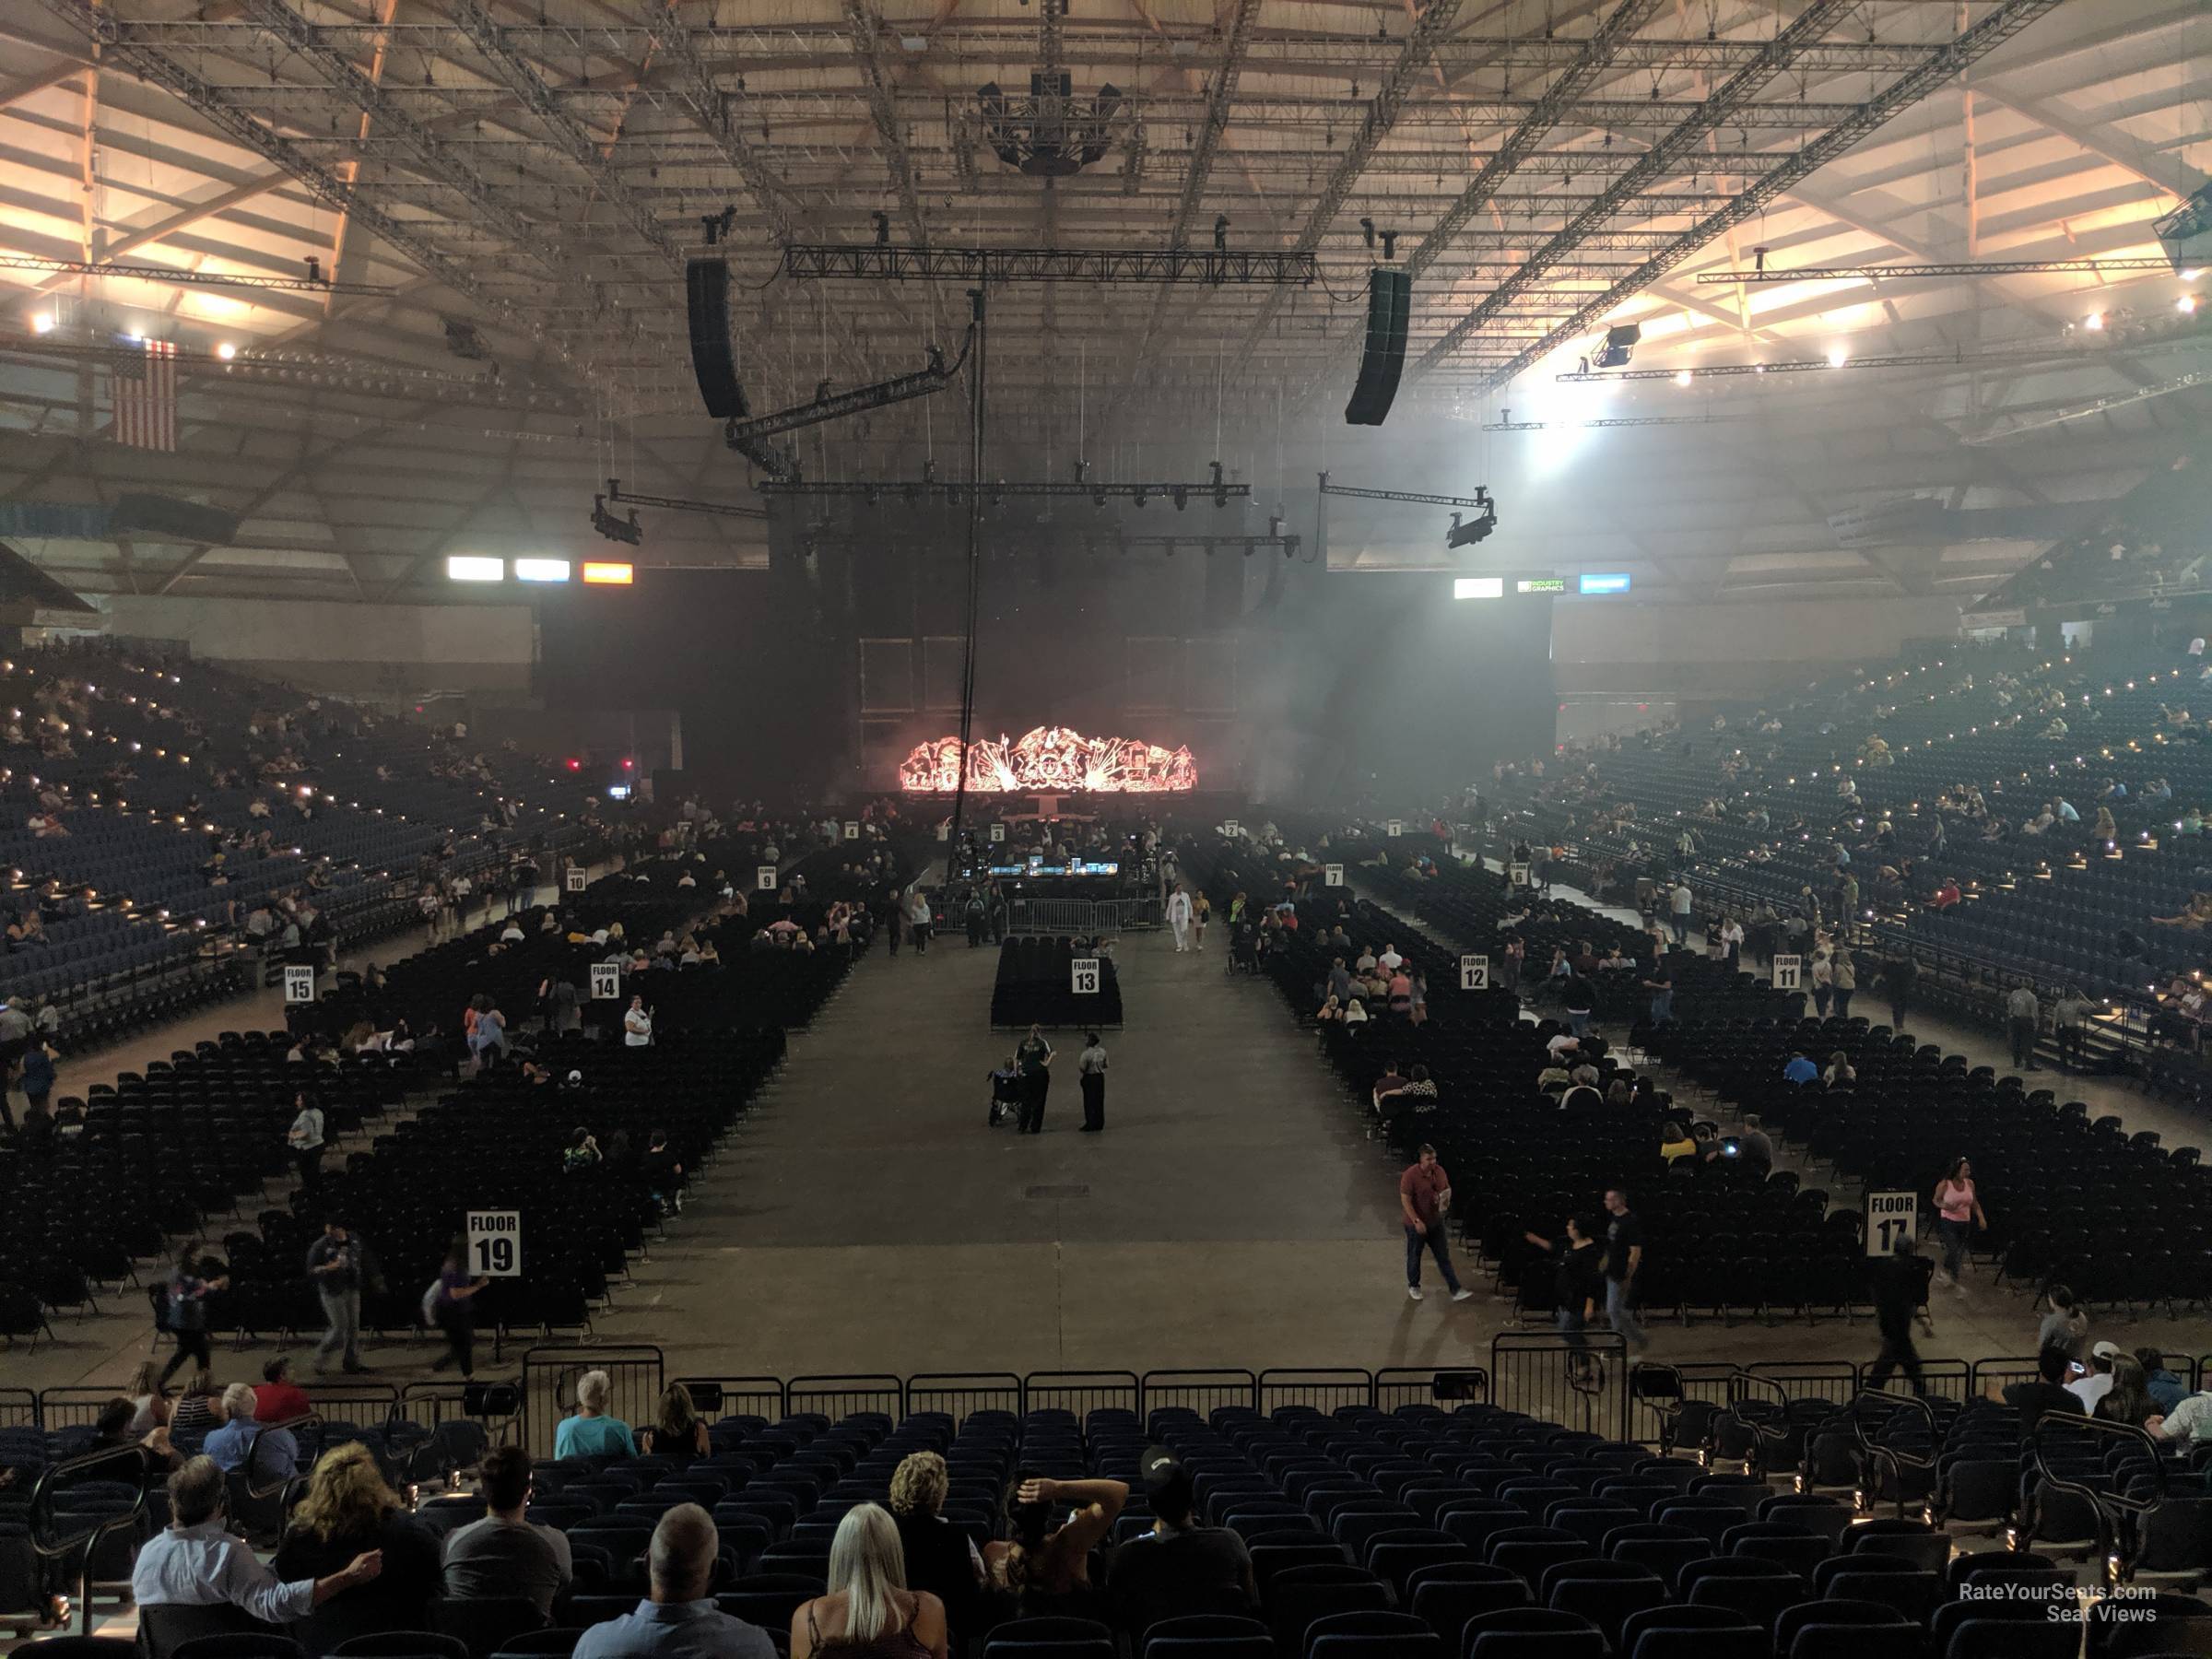 Tacoma Dome Section 111 - RateYourSeats.com